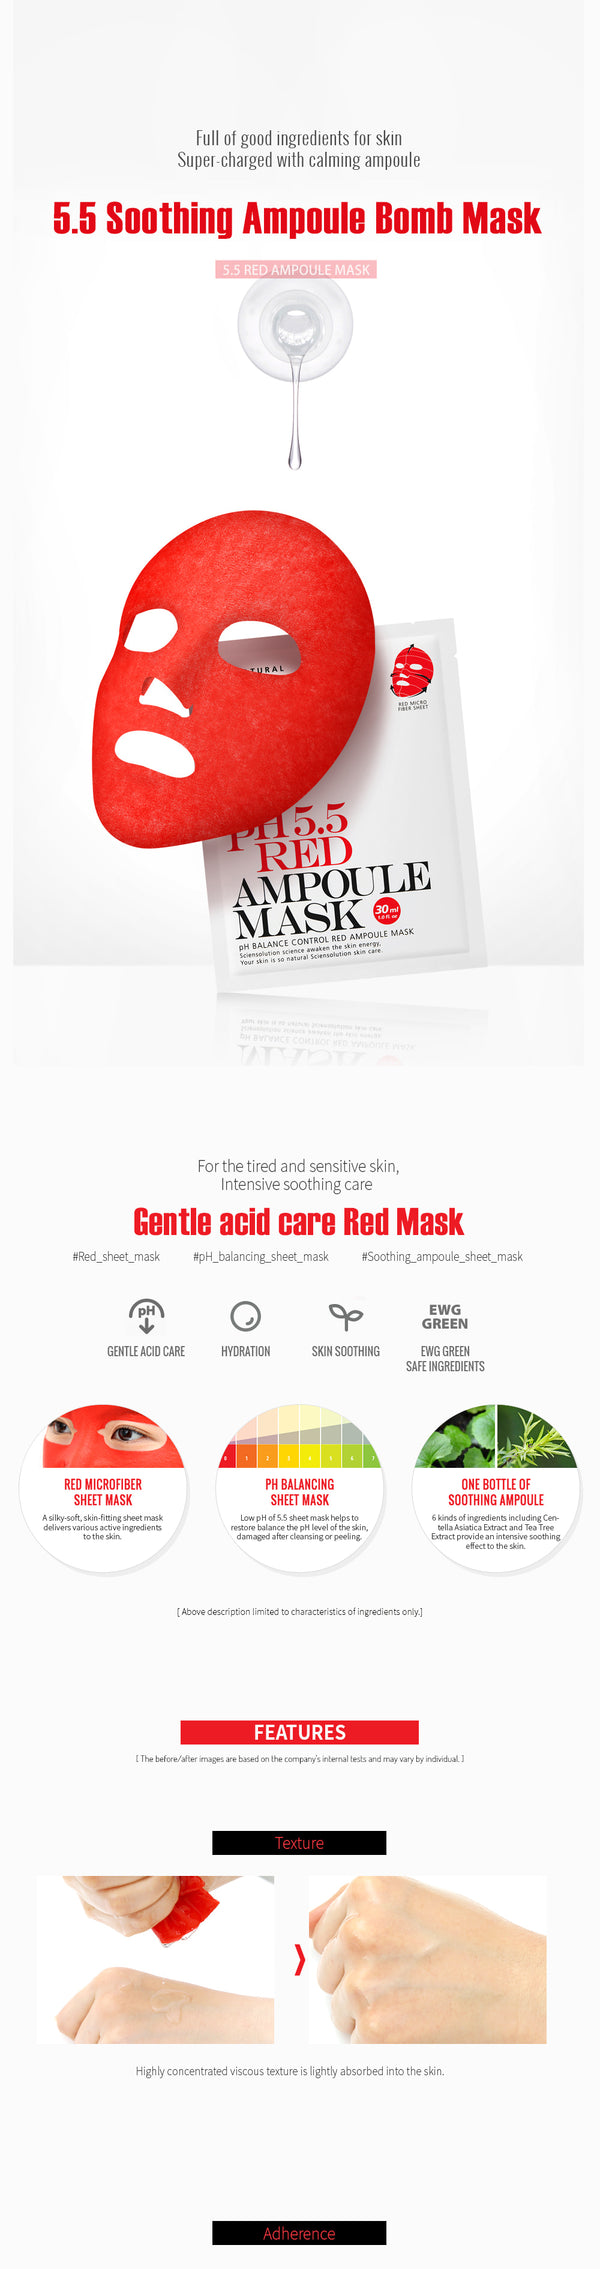 PH 5.5 RED AMPOULE MASK